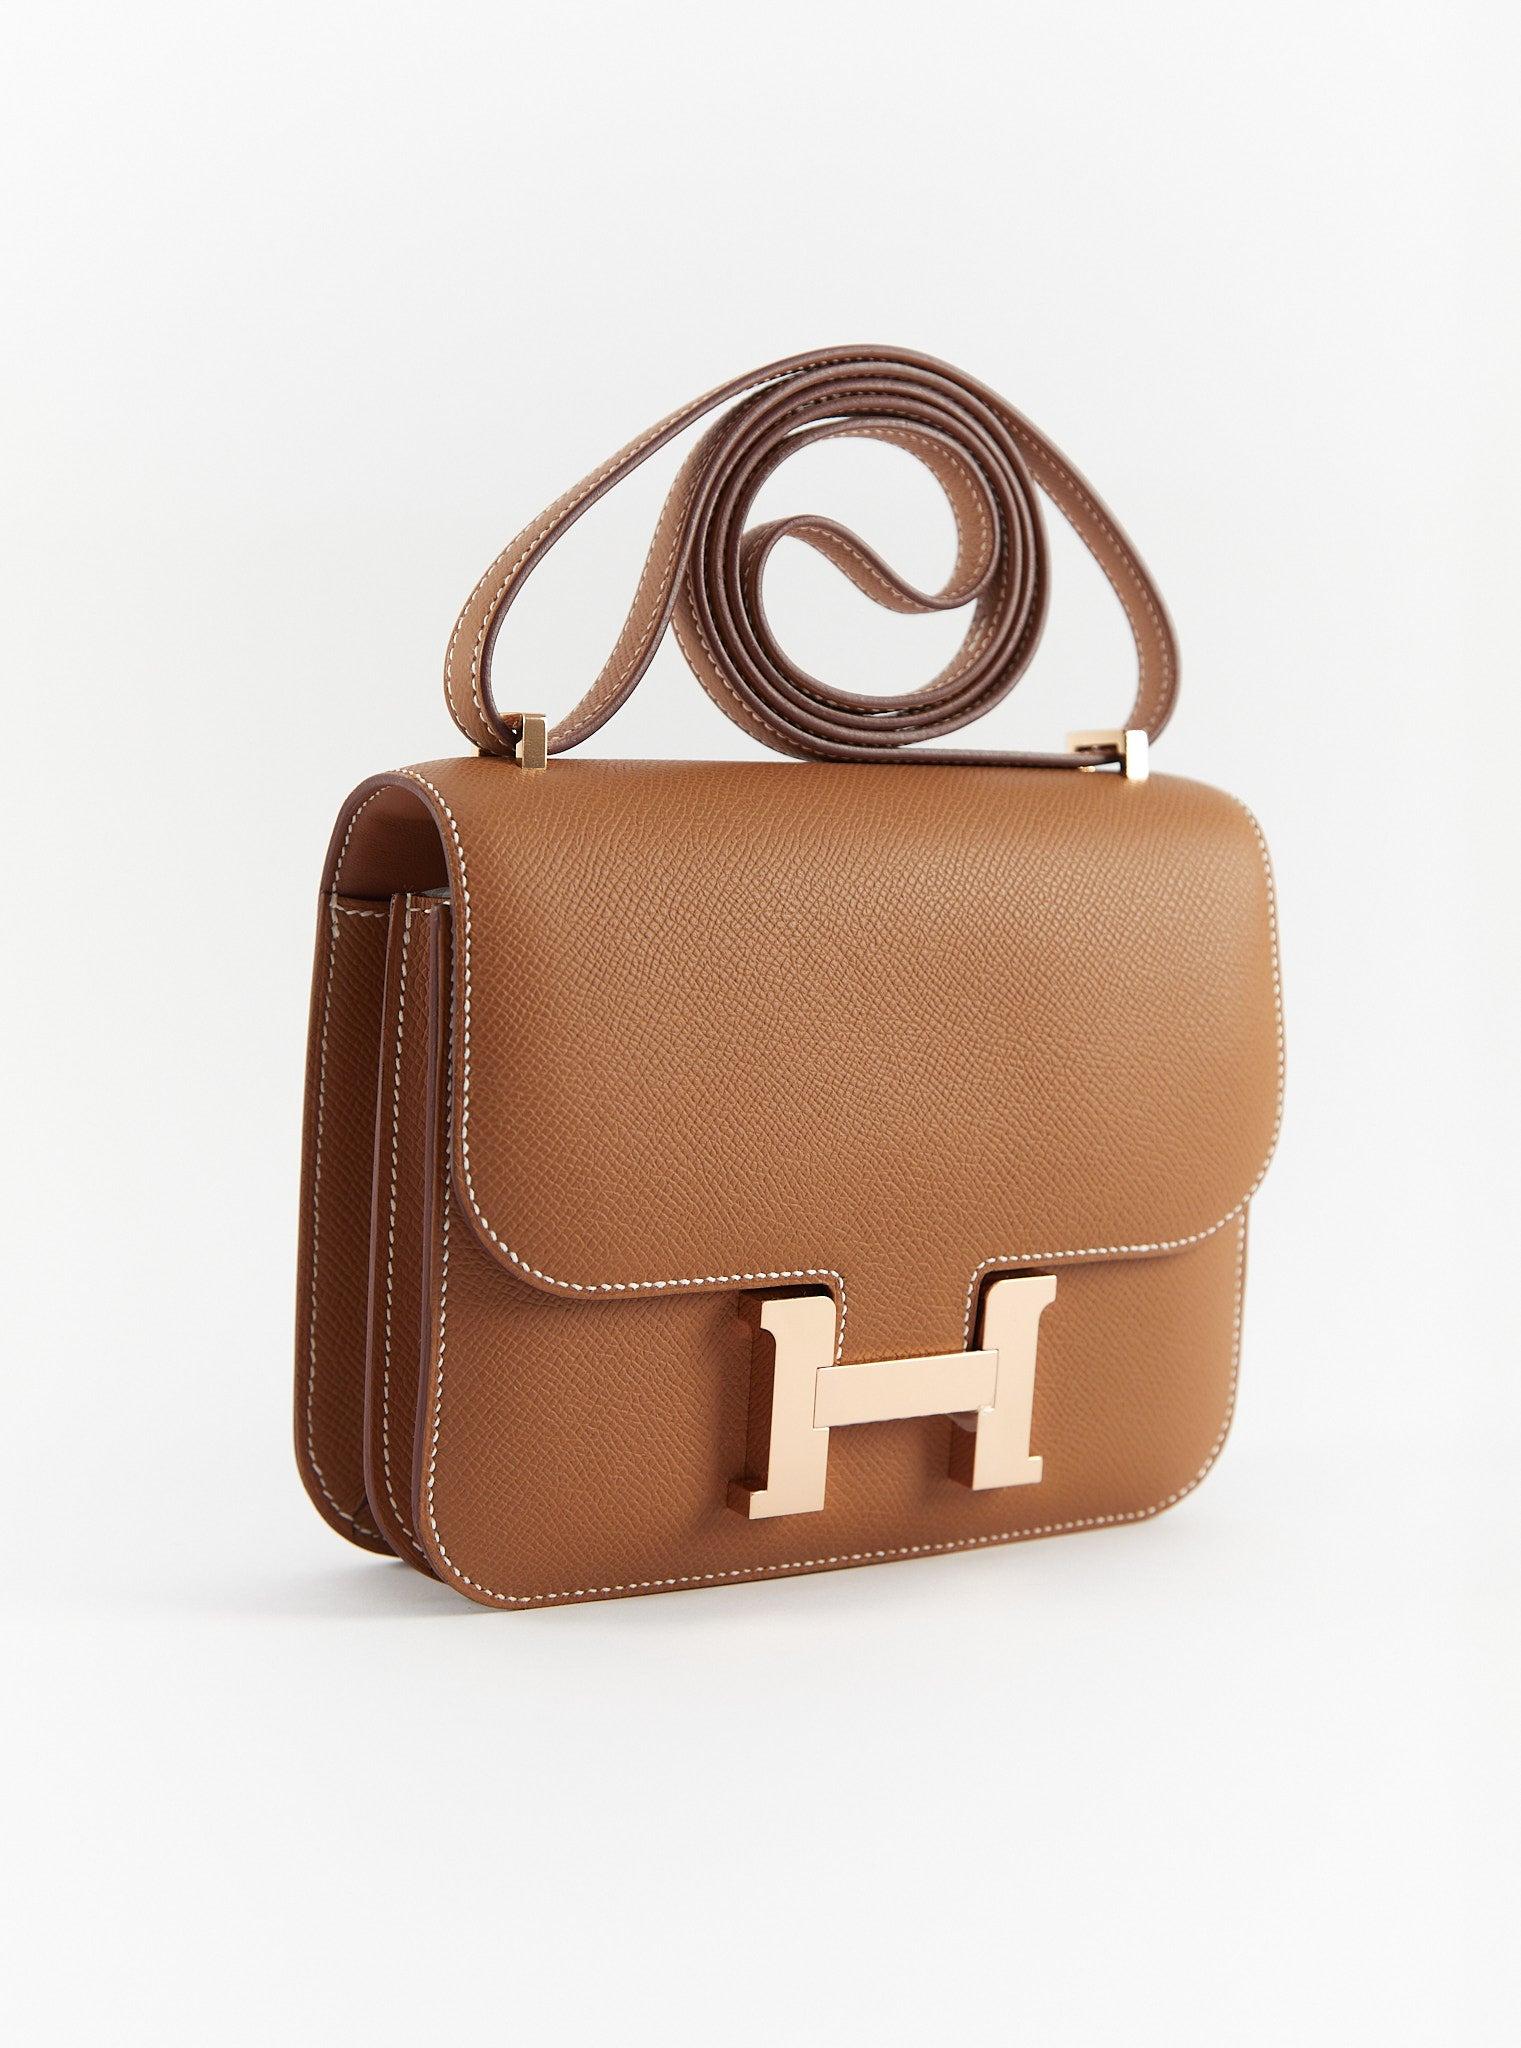 Hermès Constance 18cm in Gold

Epsom Leather with Rose Gold Hardware

B Stamp / 2024

Accompanied by: Original receipt, Hermes box, Hermes dustbag, care card and felt

Measurements: W 7.25